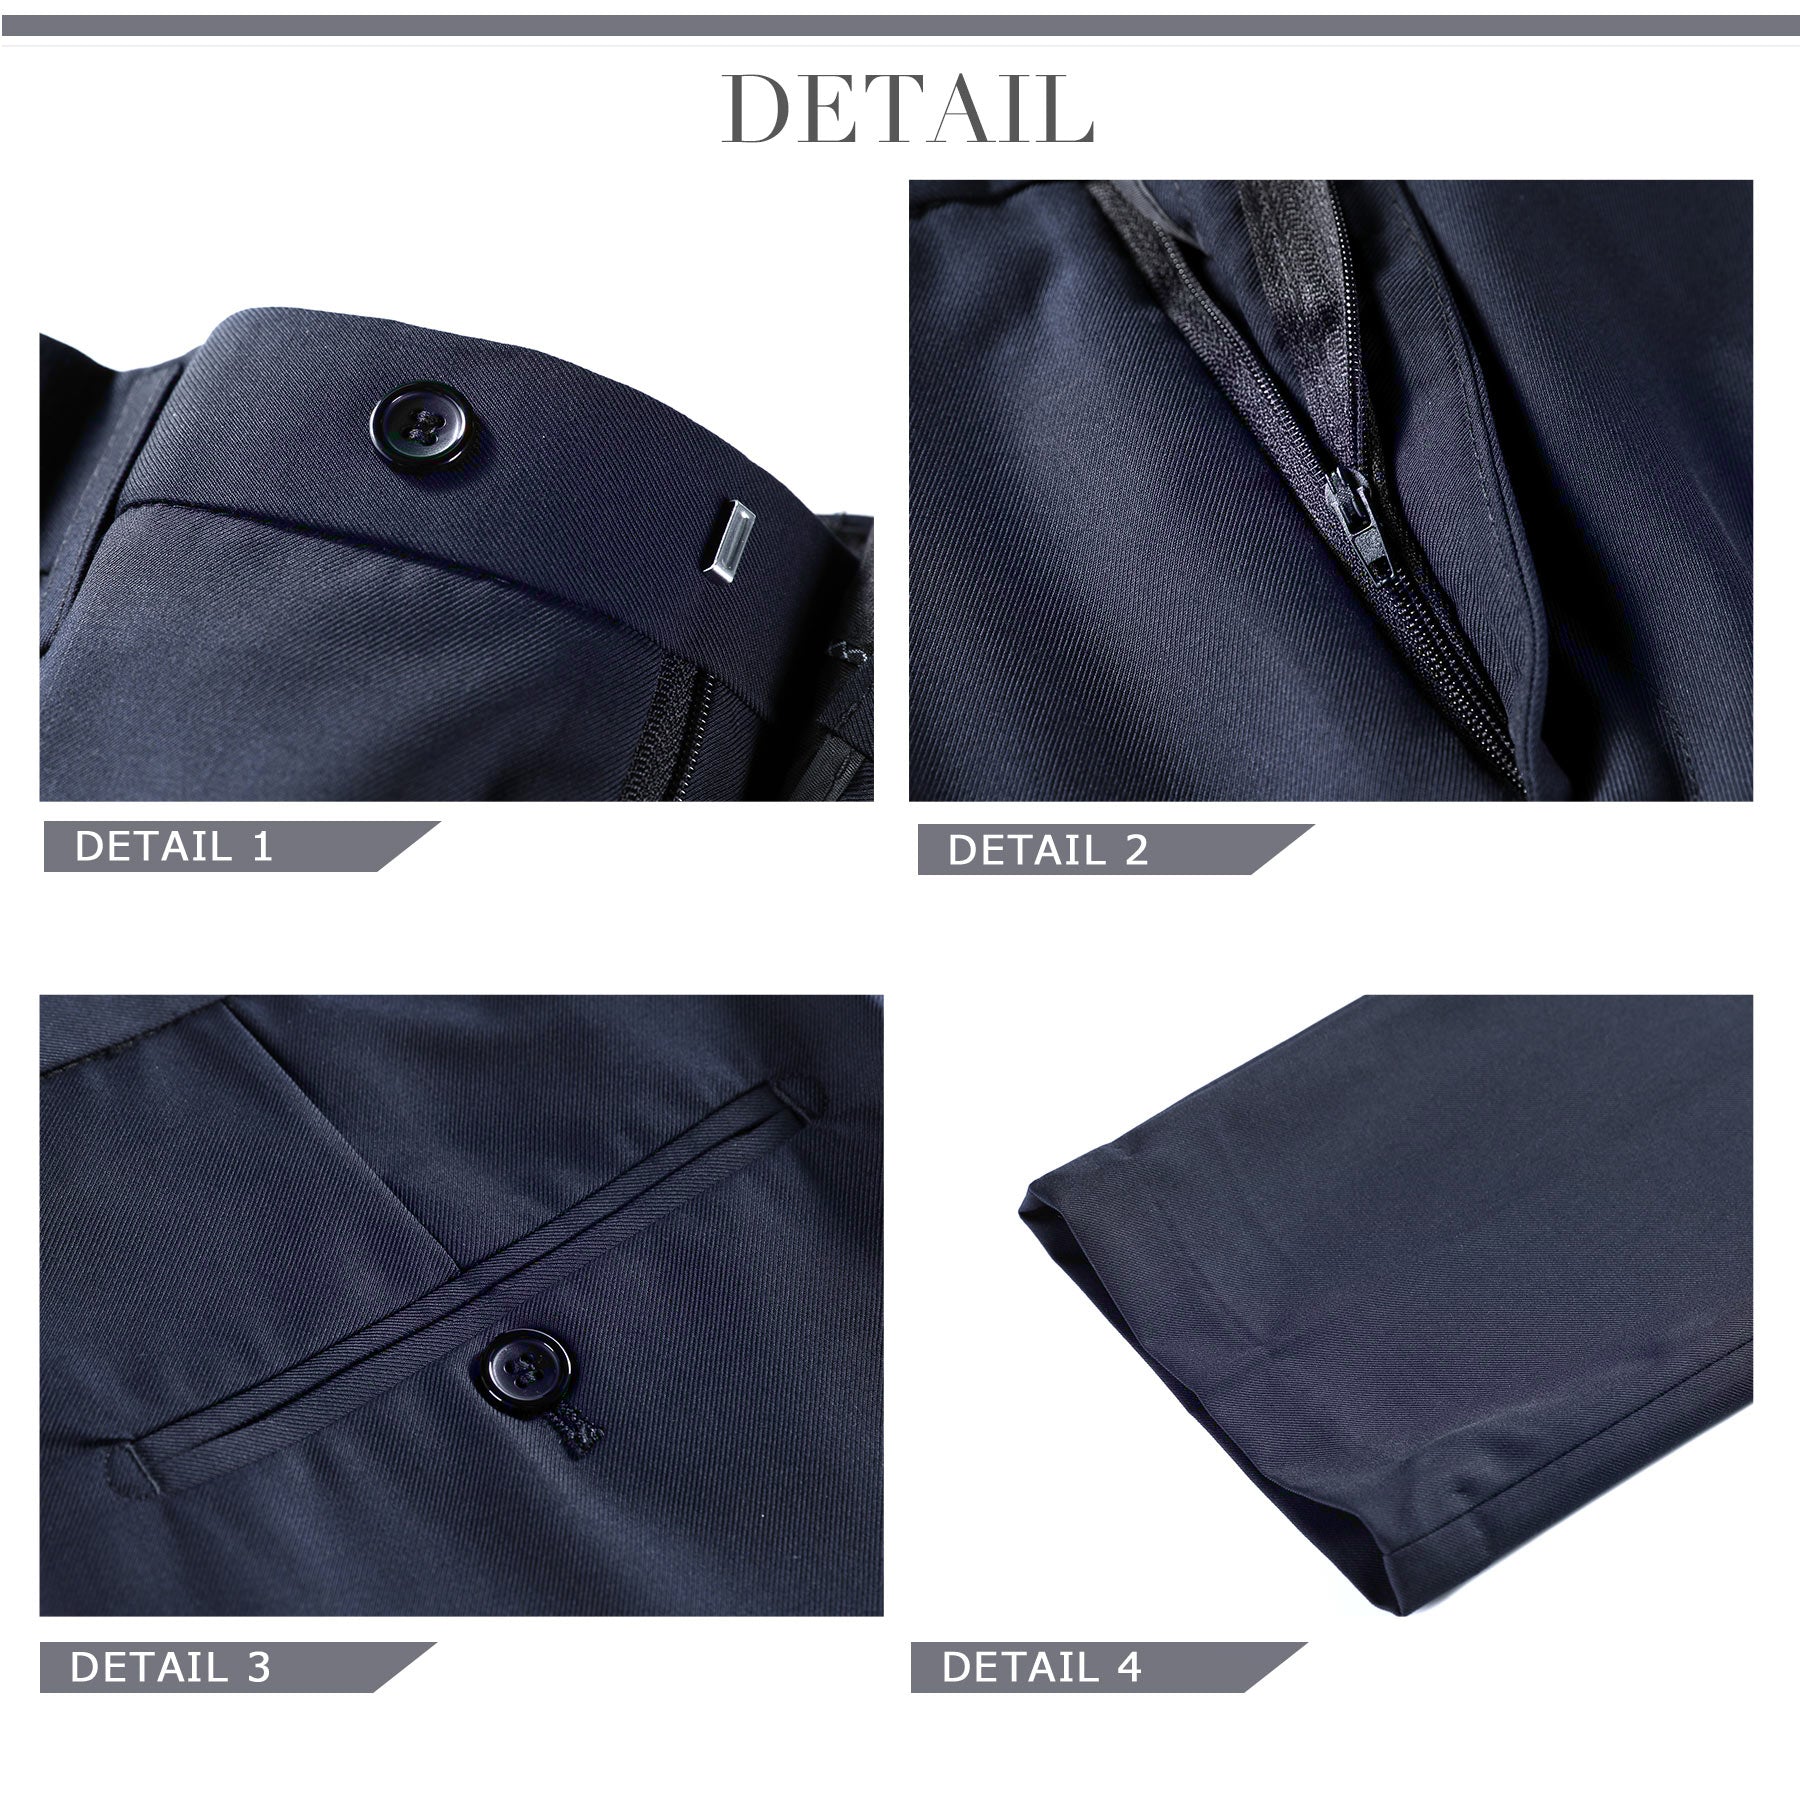 Two Piece Navy Suit One Button Suit